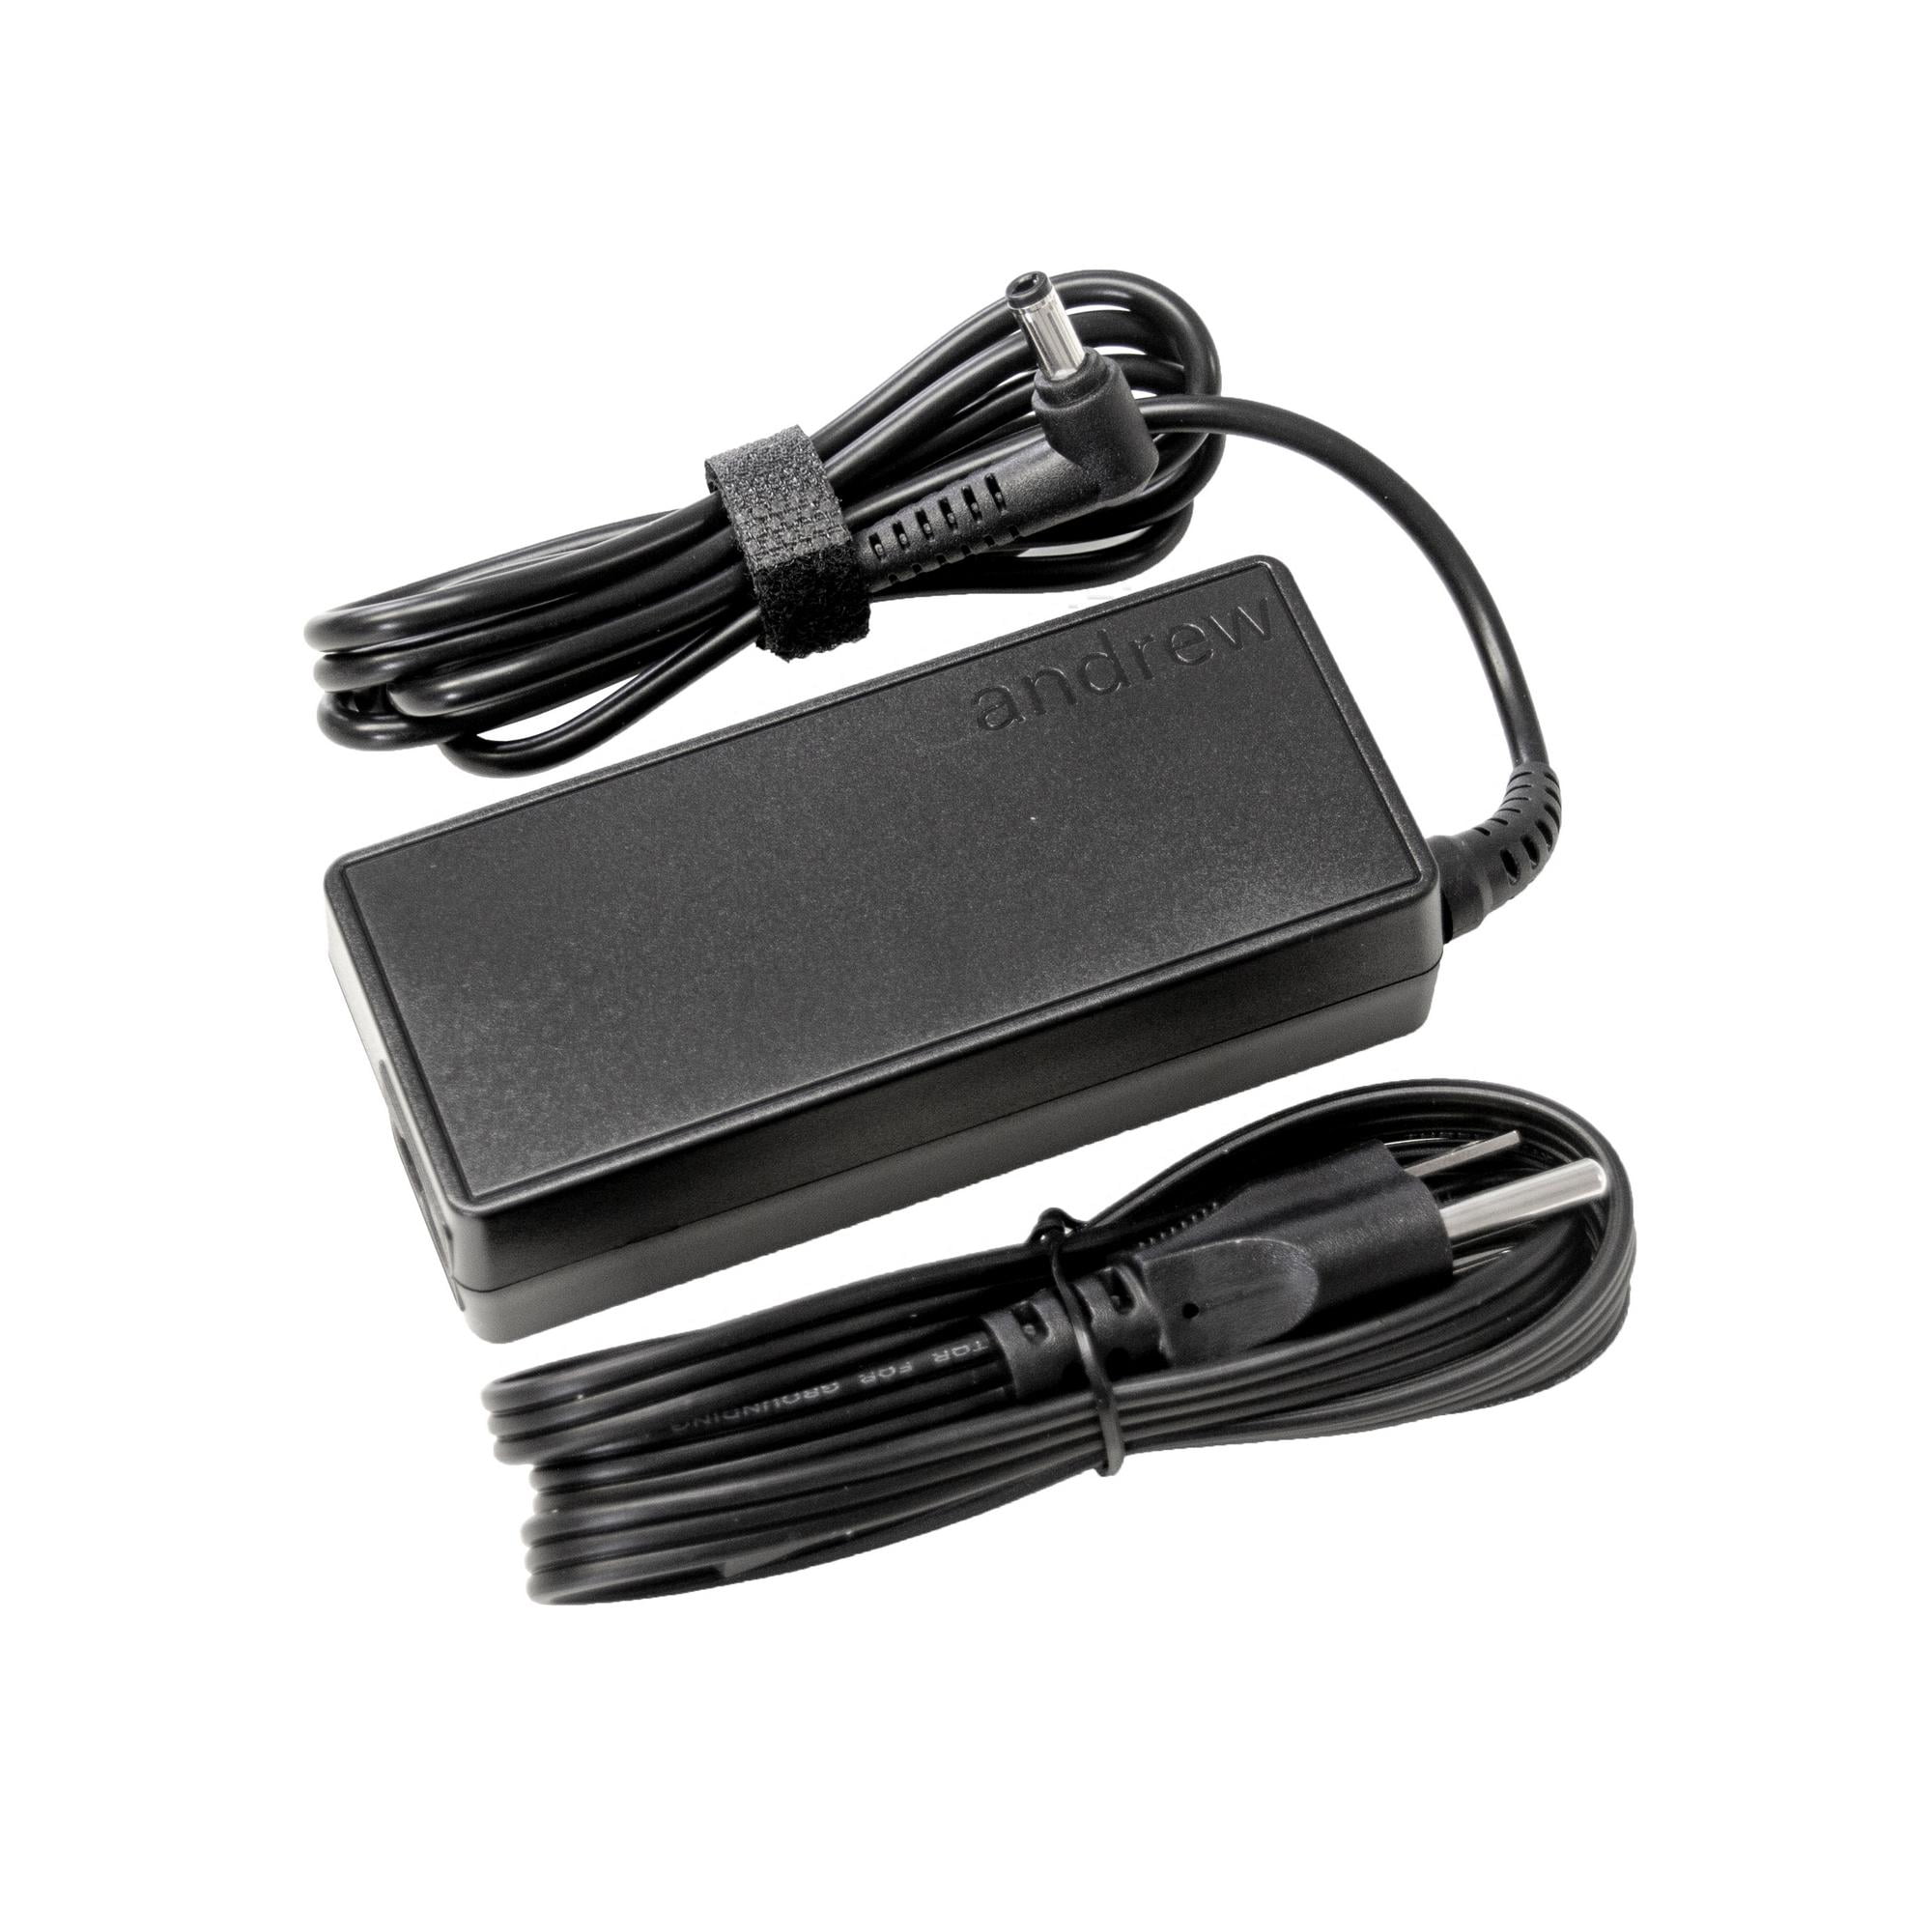 19V 3.42A 65W Laptop Charger AC Adapter Power Andrew - Walmart.com